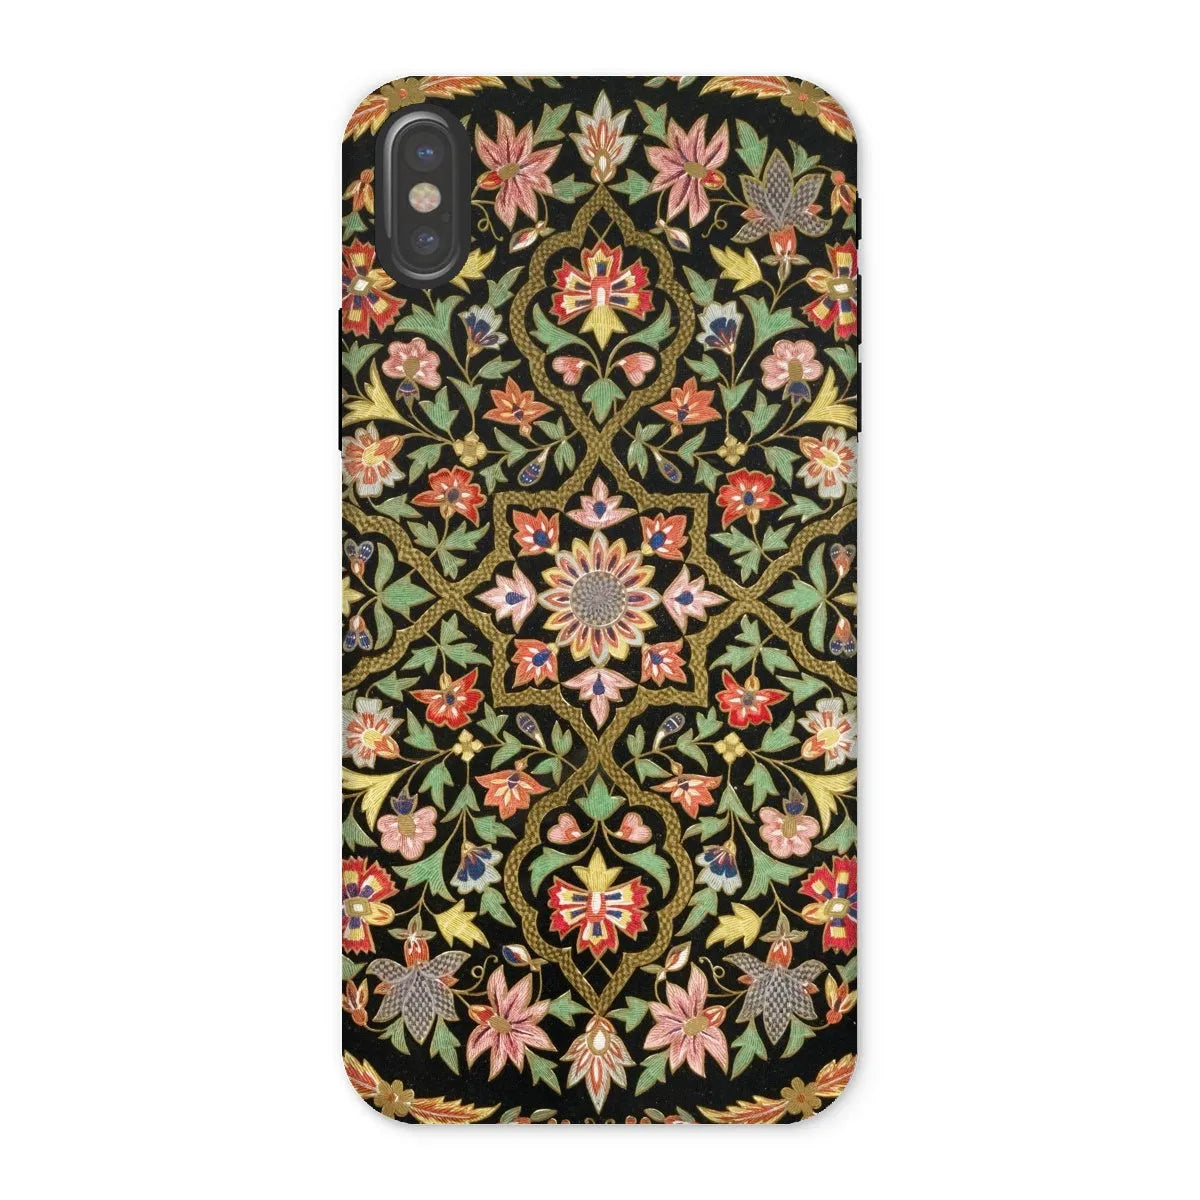 Indian Embroidery - Aesthetic Pattern Art Phone Case - Iphone x / Matte - Mobile Phone Cases - Aesthetic Art